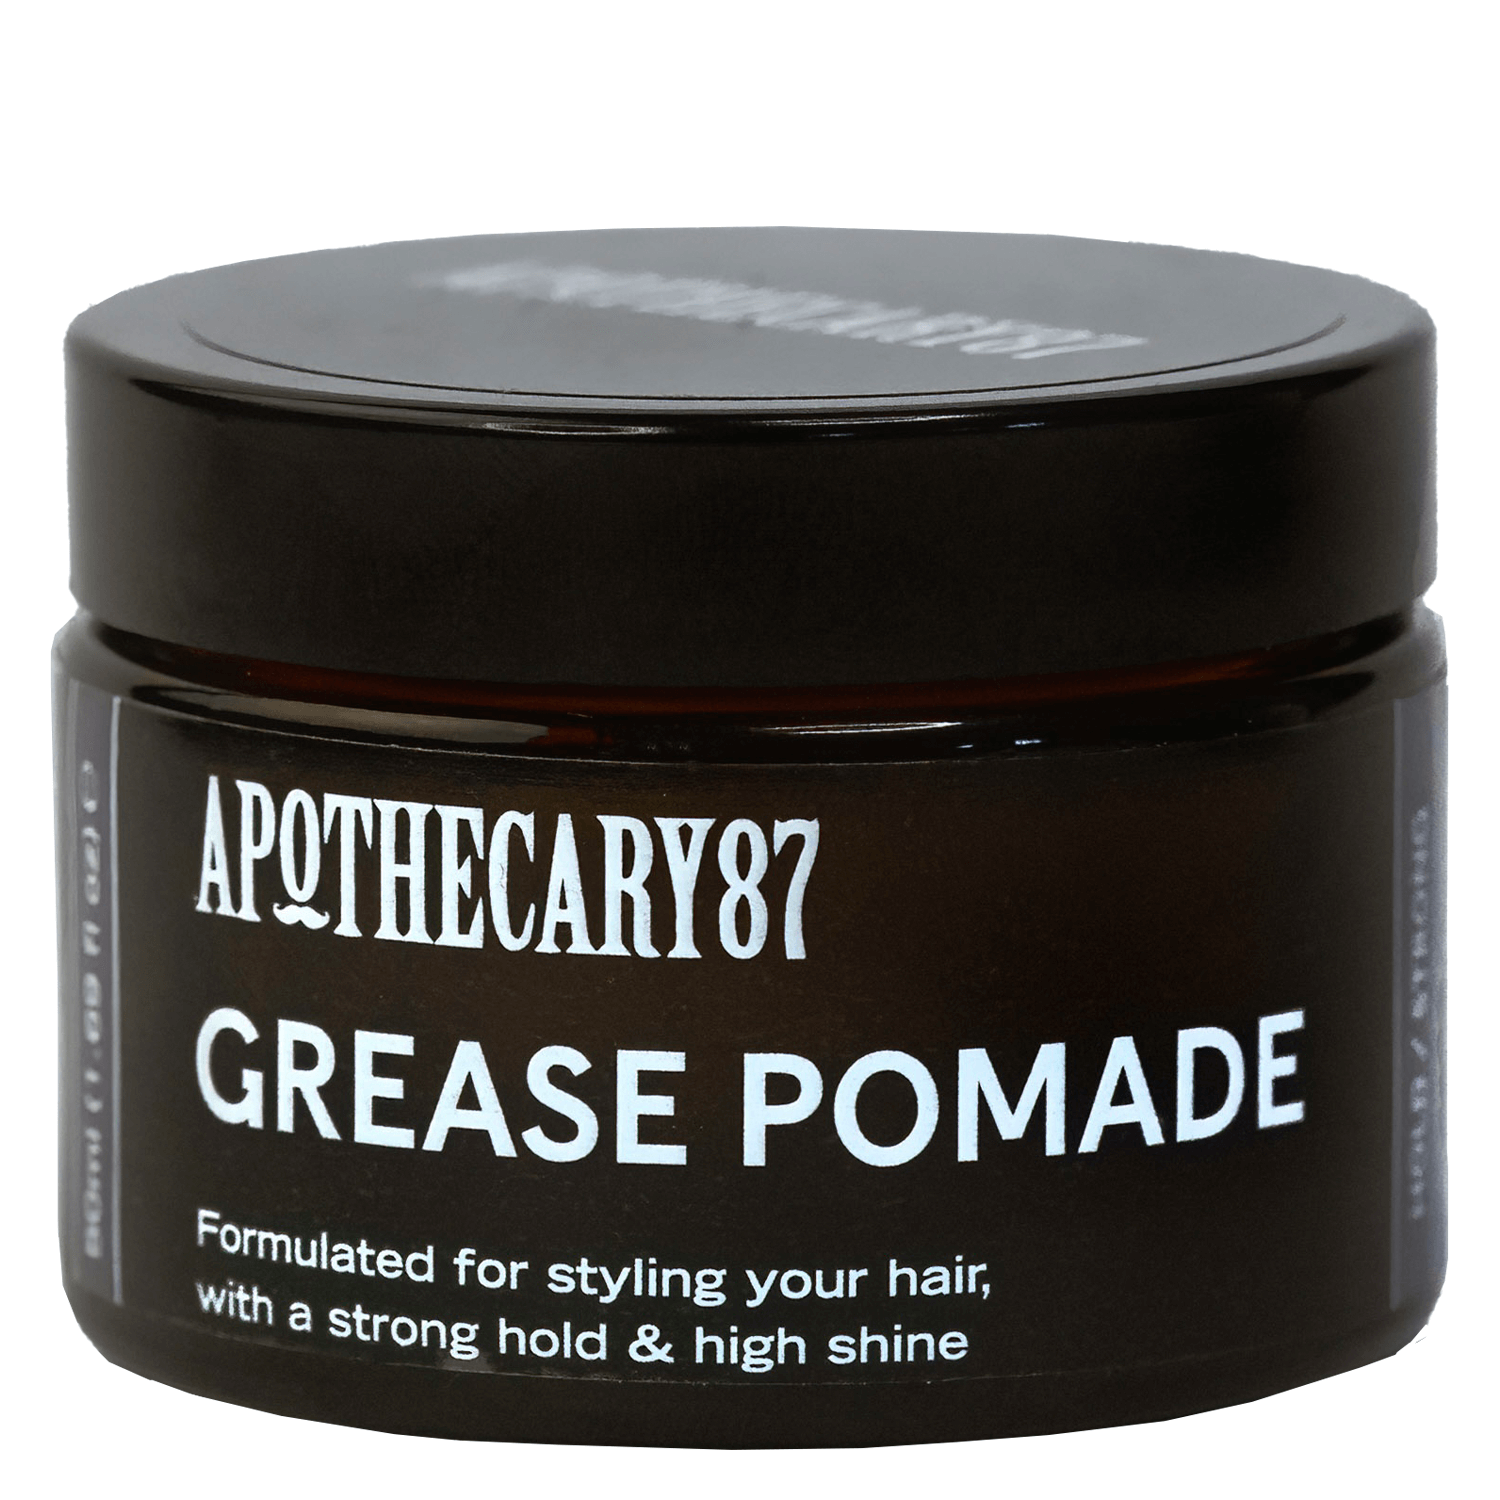 Product image from Apothecary87 Grooming - Grease Pomade